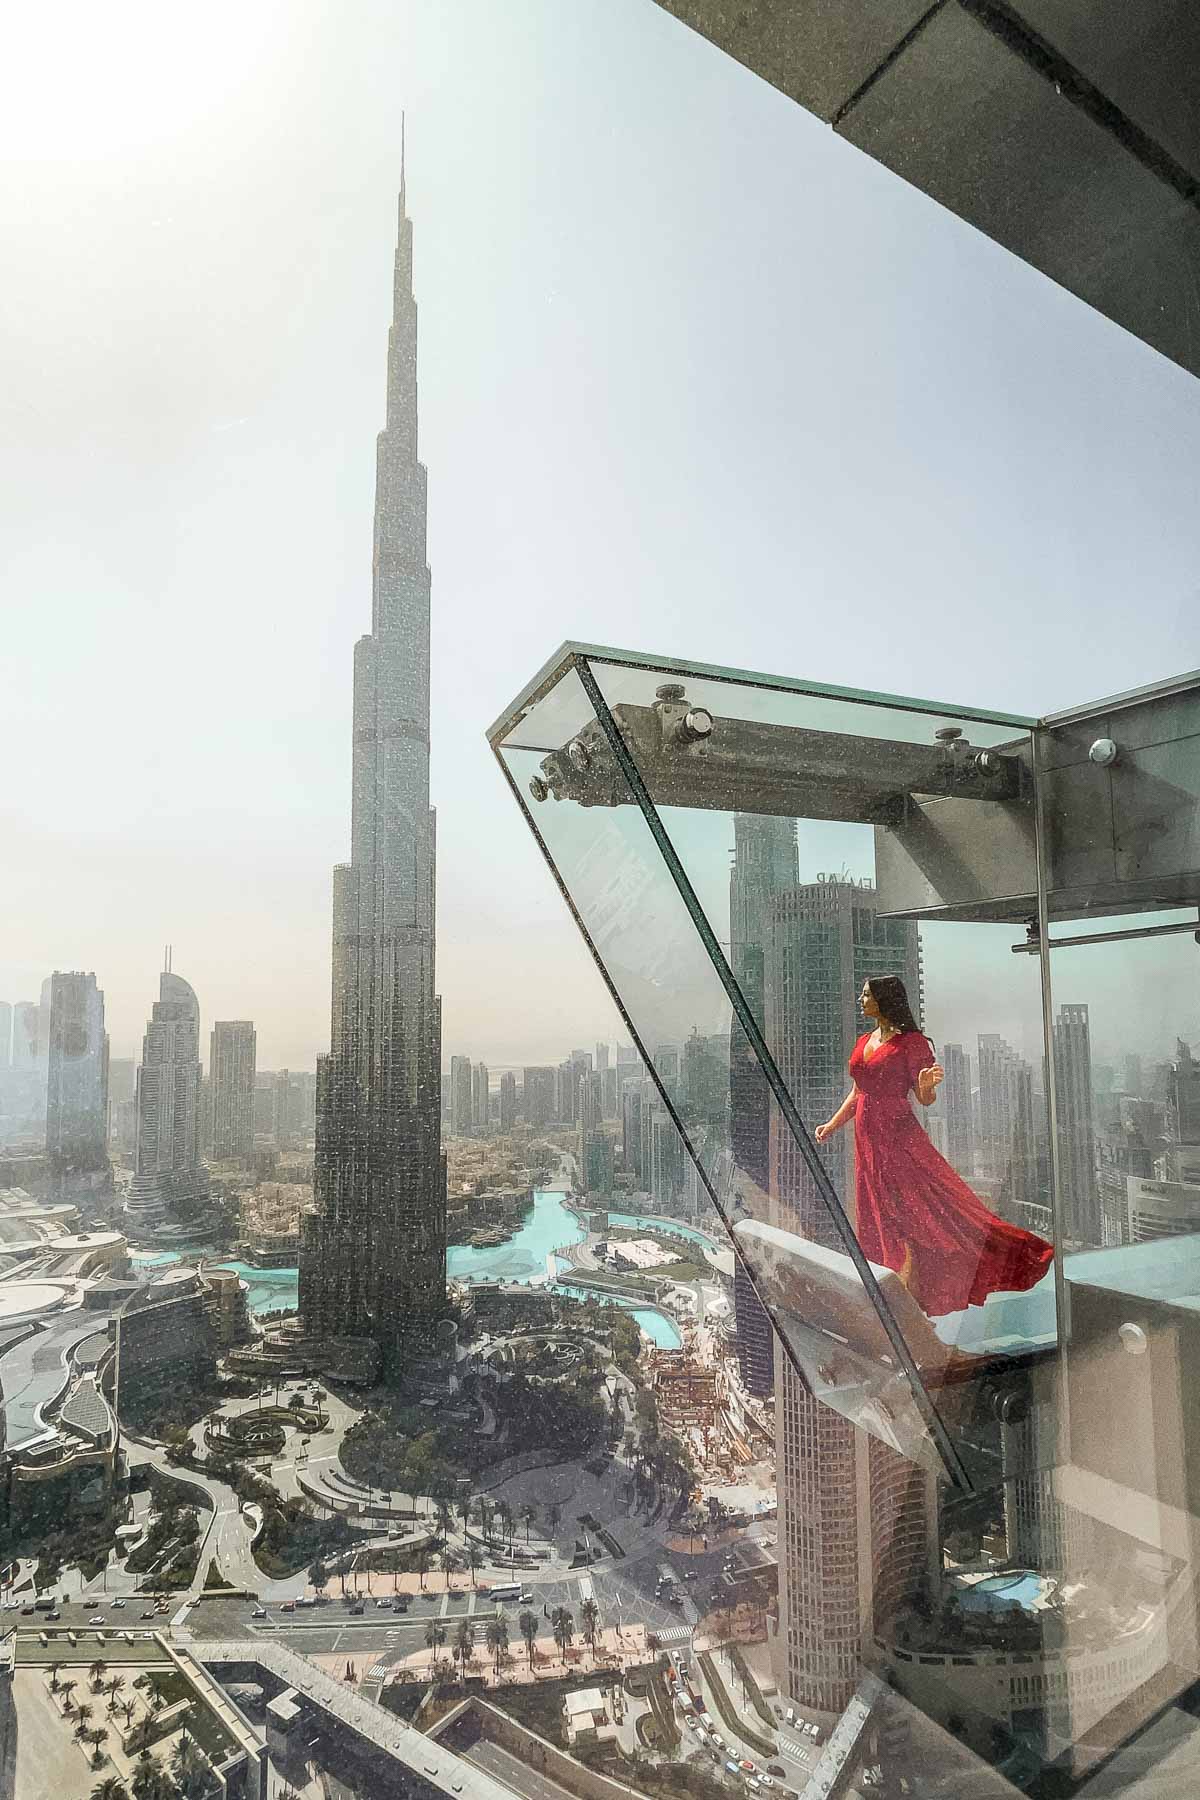 Sky Views Observatory, one of the newest Instagram Spots in Dubai